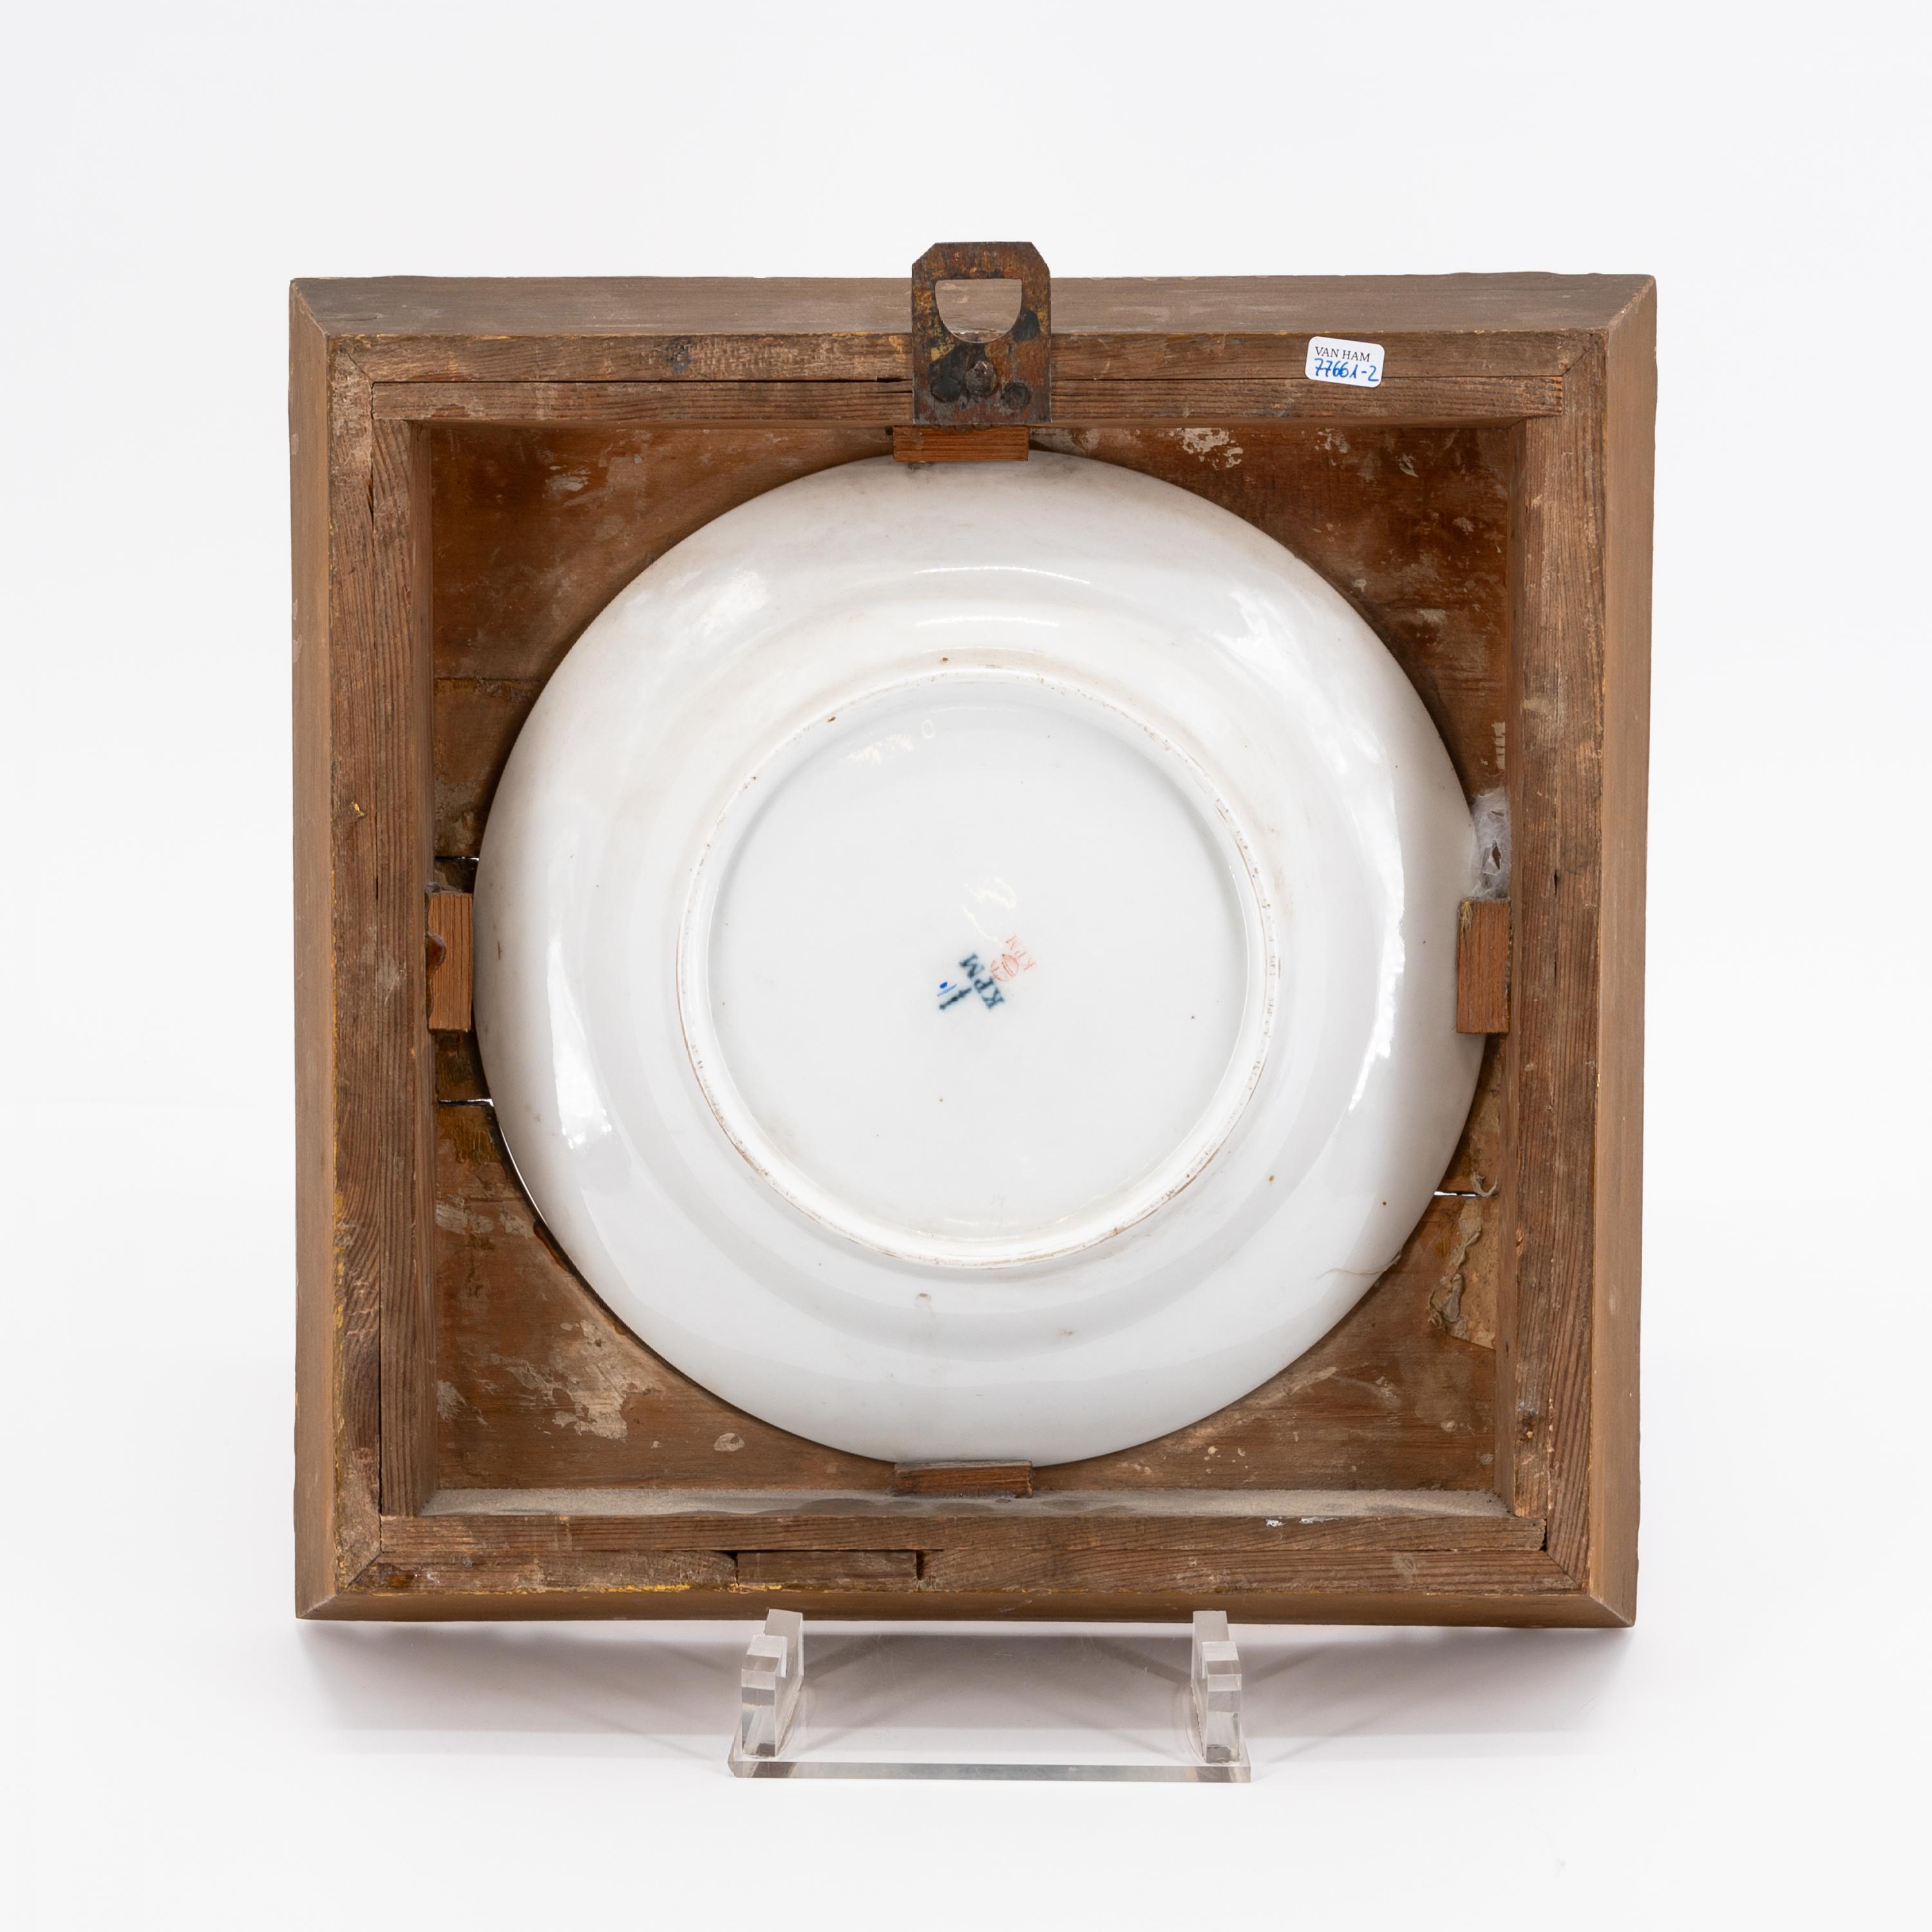 EXEPTIONAL SERIES OF TWELVE PORCELAIN PLATES WITH ROMANTIC VIEWS OF THE RHINE - Image 4 of 26